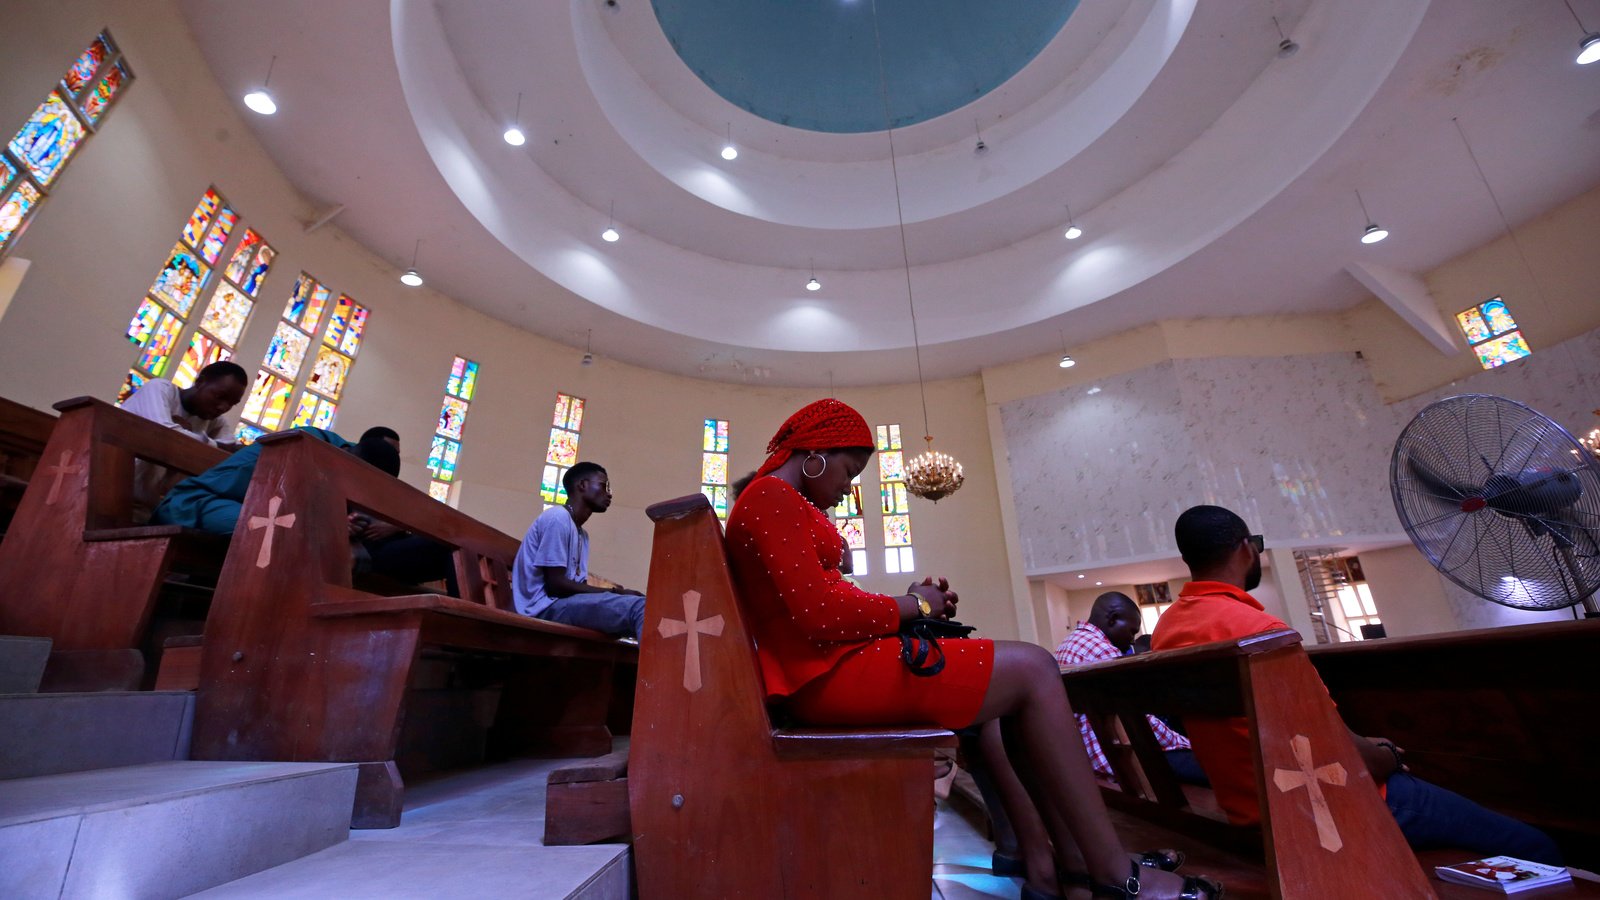 LAGOS EASES VIRUS LOCKDOWN, REOPENING CHURCHES, MOSQUES